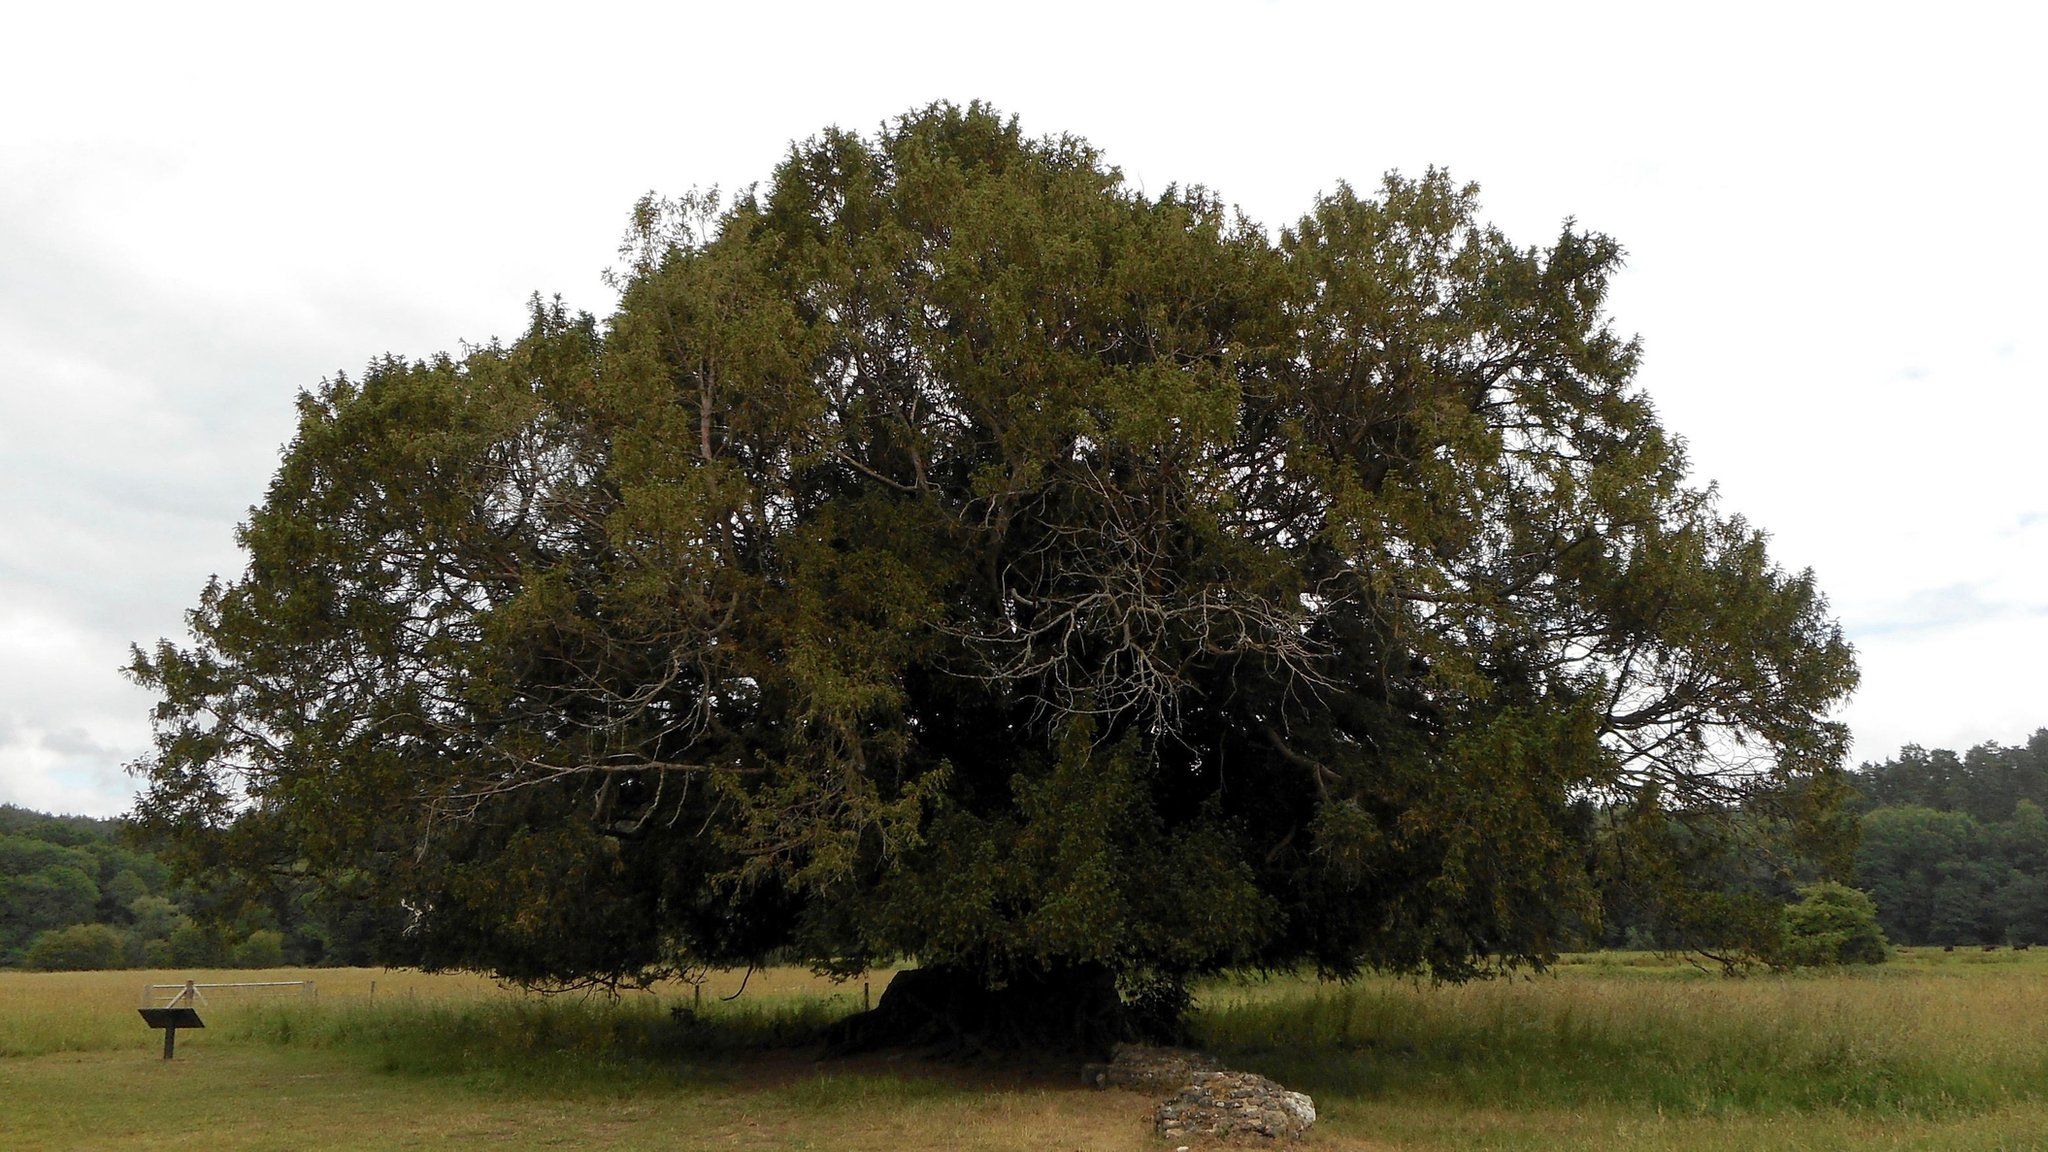 The Waverley Abbey Yew Tree has been named the tree of the year